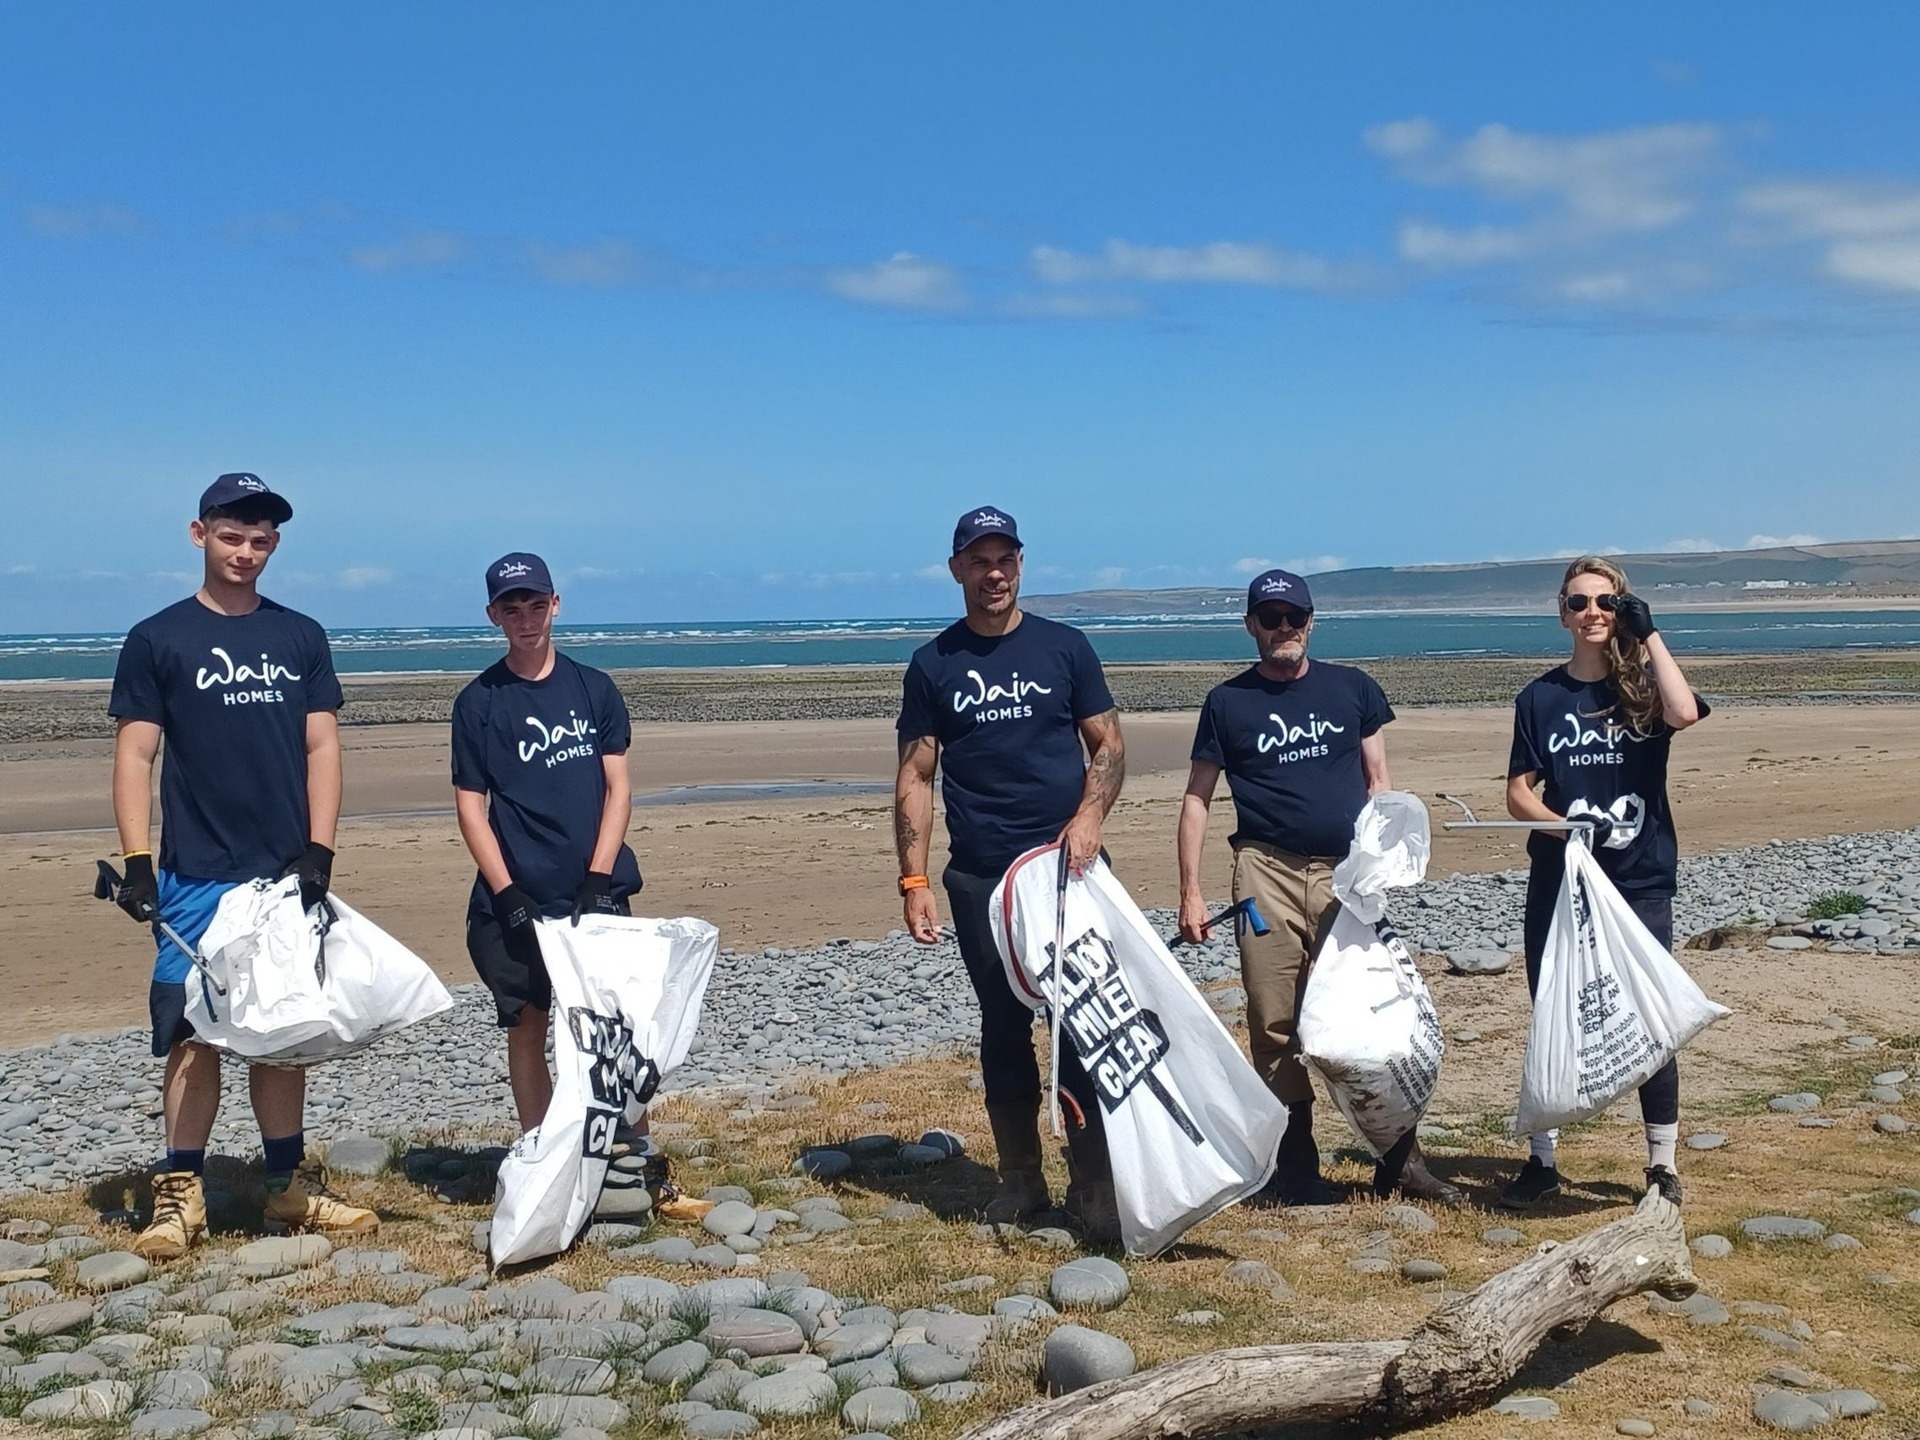 South West Colleagues Take on Beach Tidy Challenge